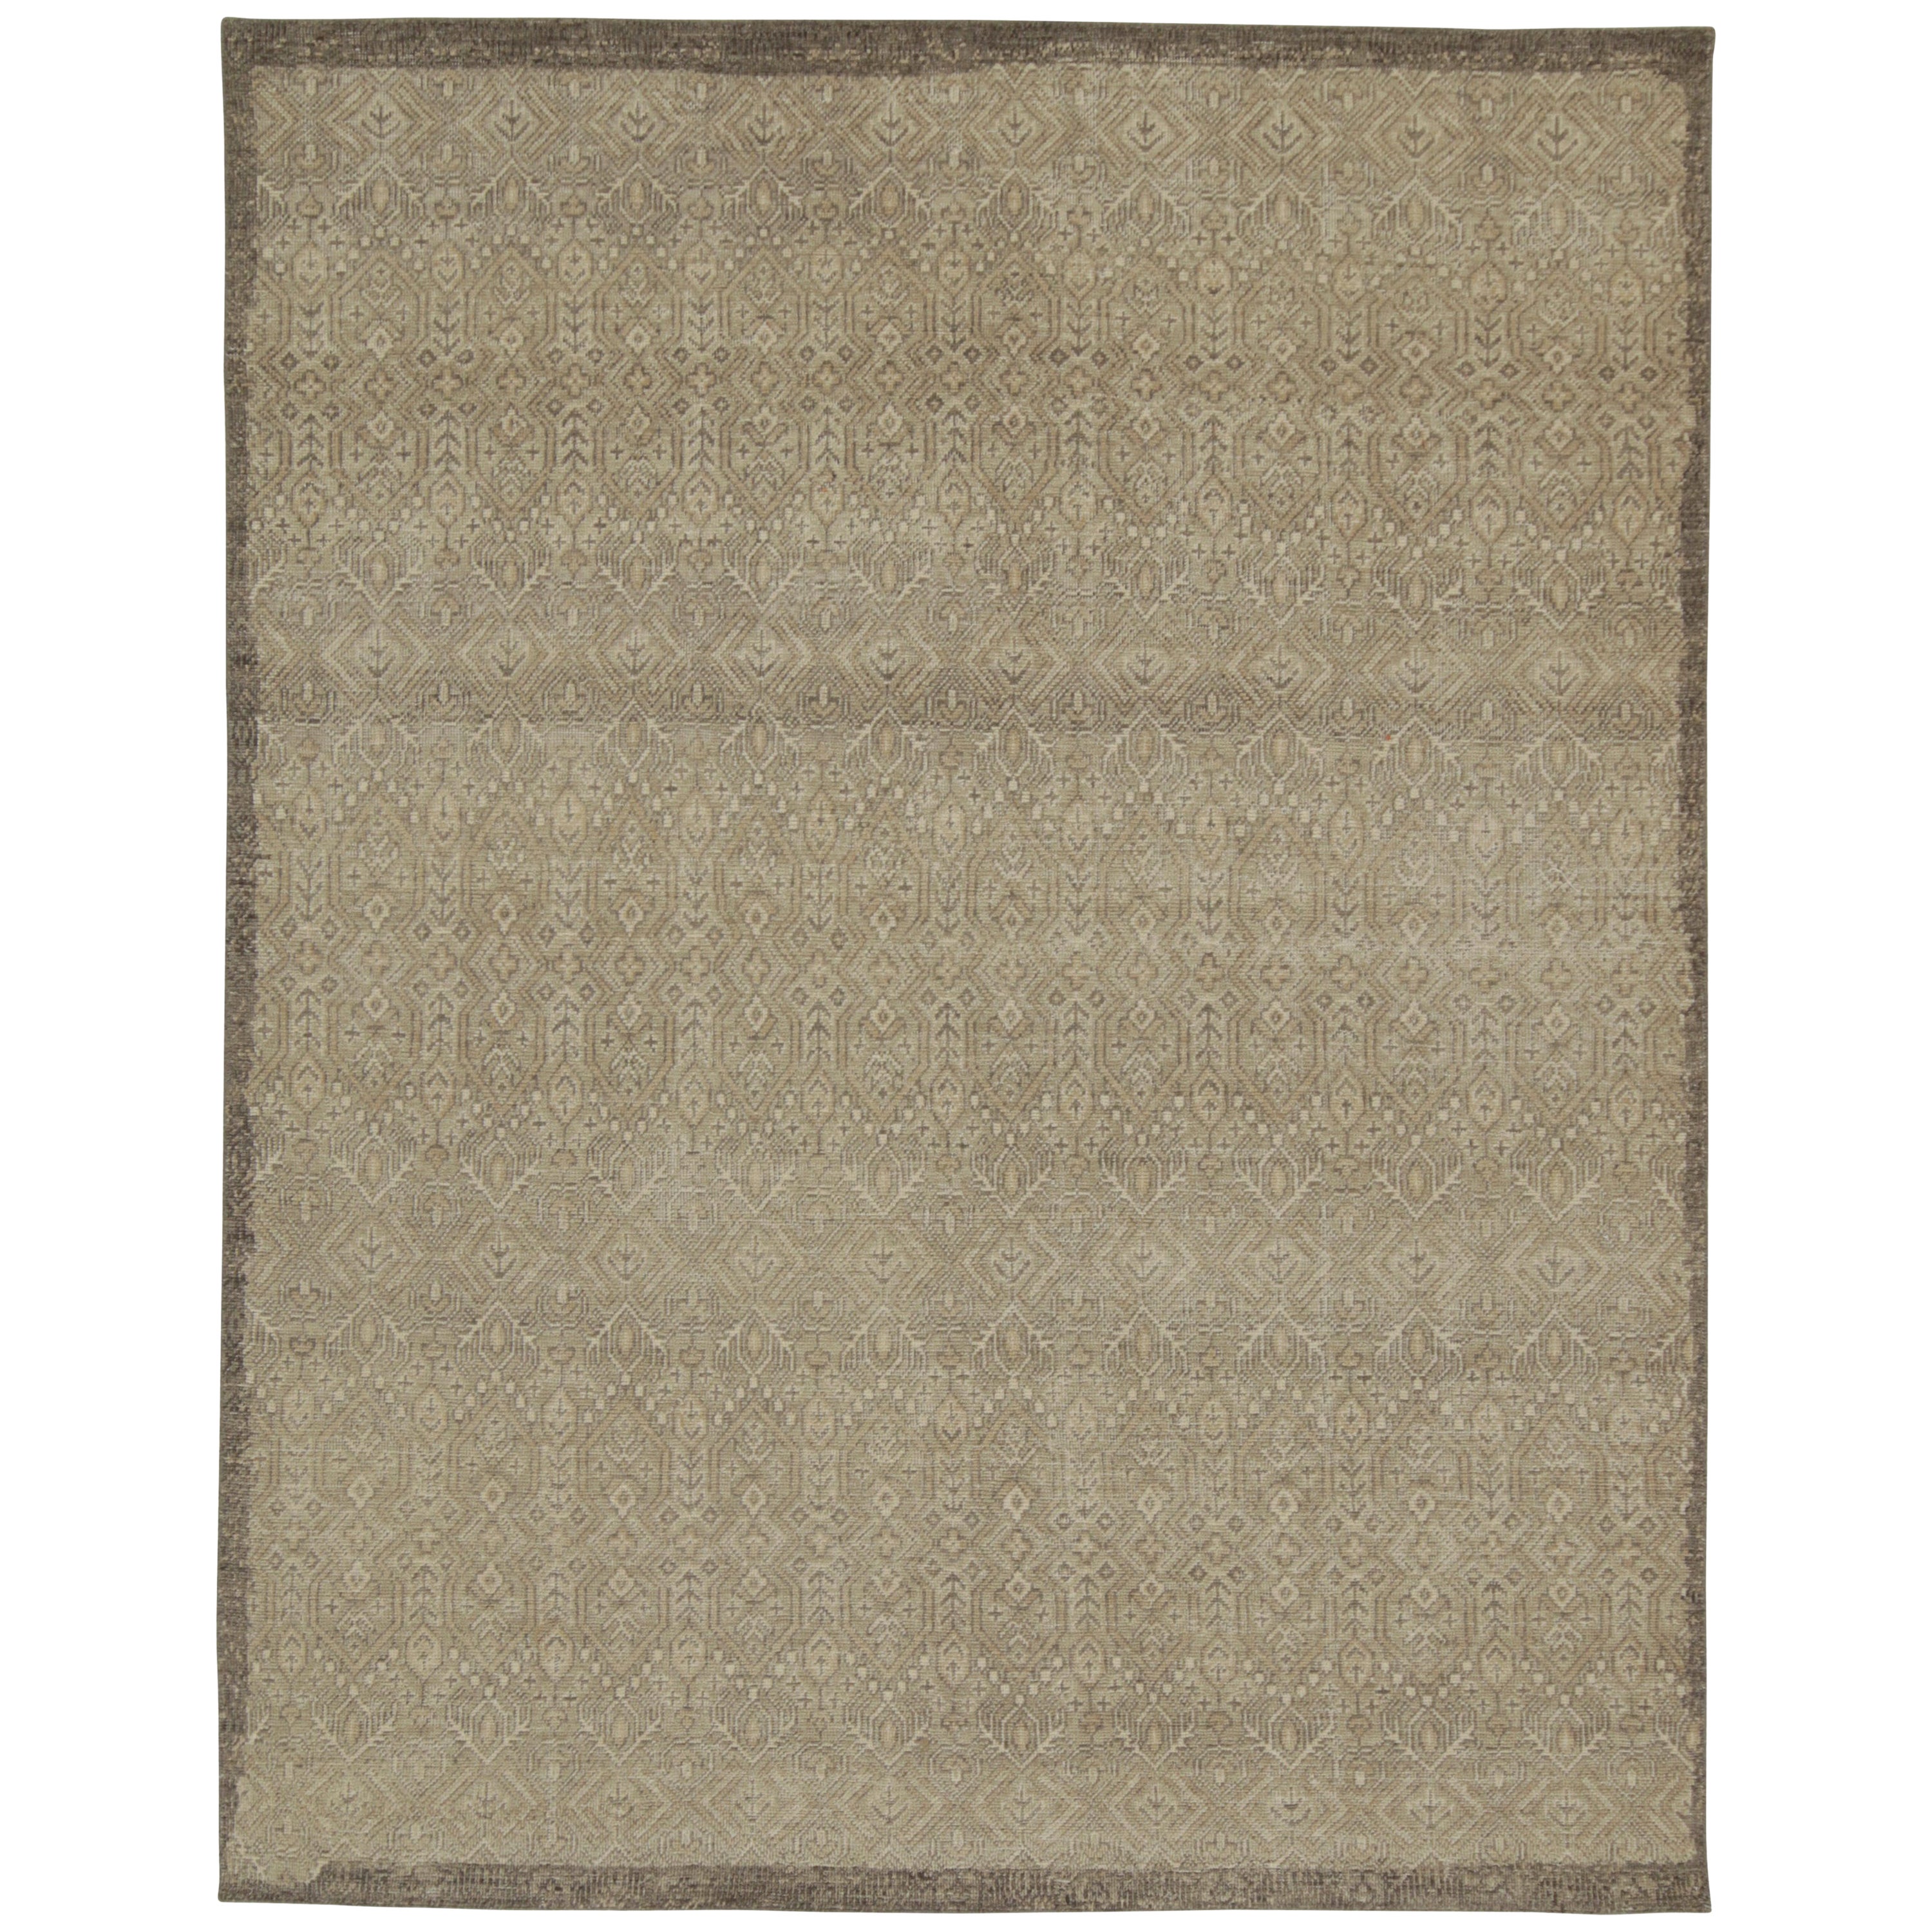 Rug & Kilim’s Distressed Tribal style rug in Beige and Gray Geometric Patterns For Sale